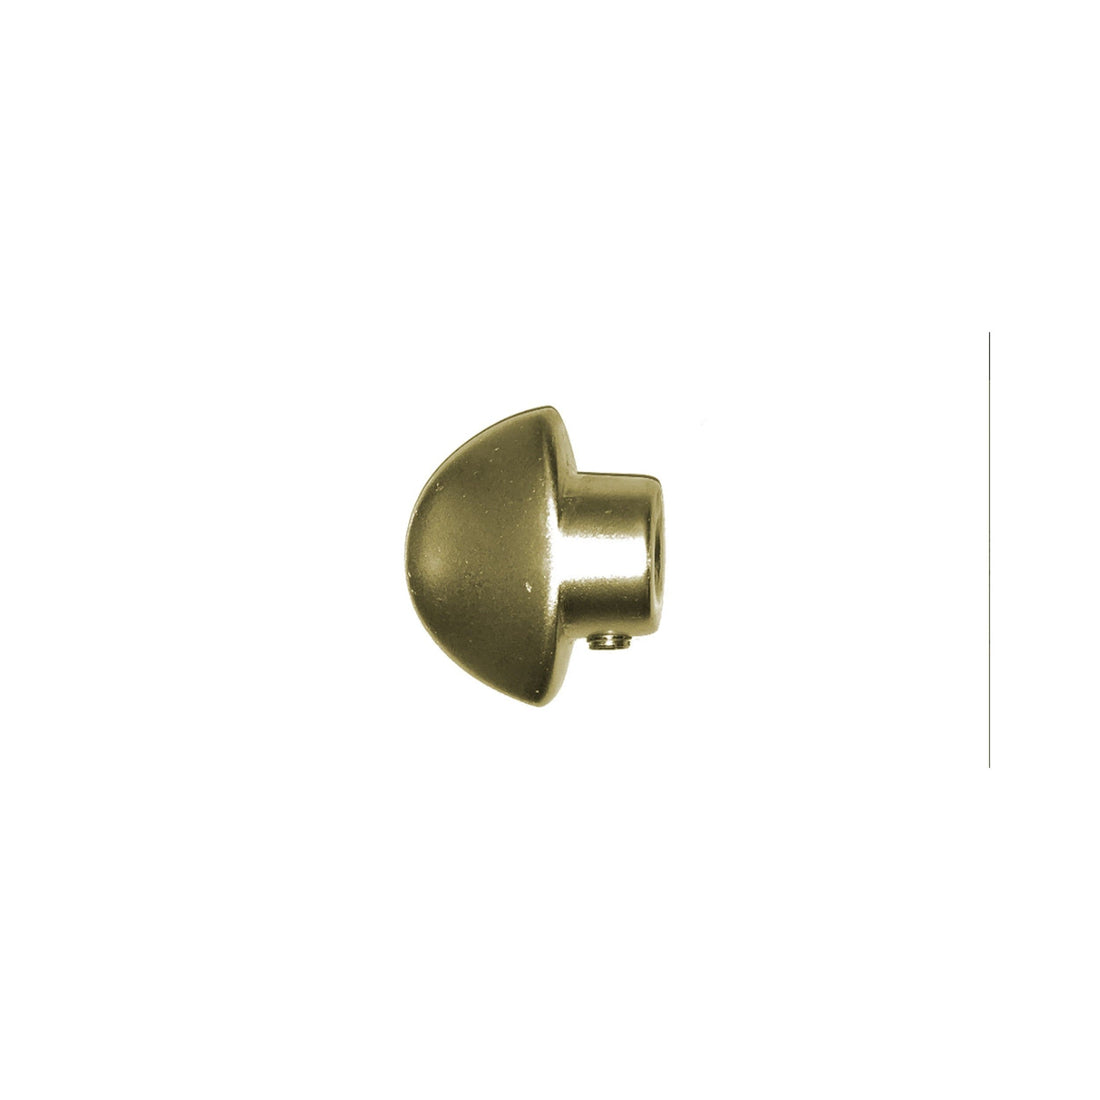 KNOB FOR CYLINDER DIAMETER 40X32 MM BRASS-PLATED